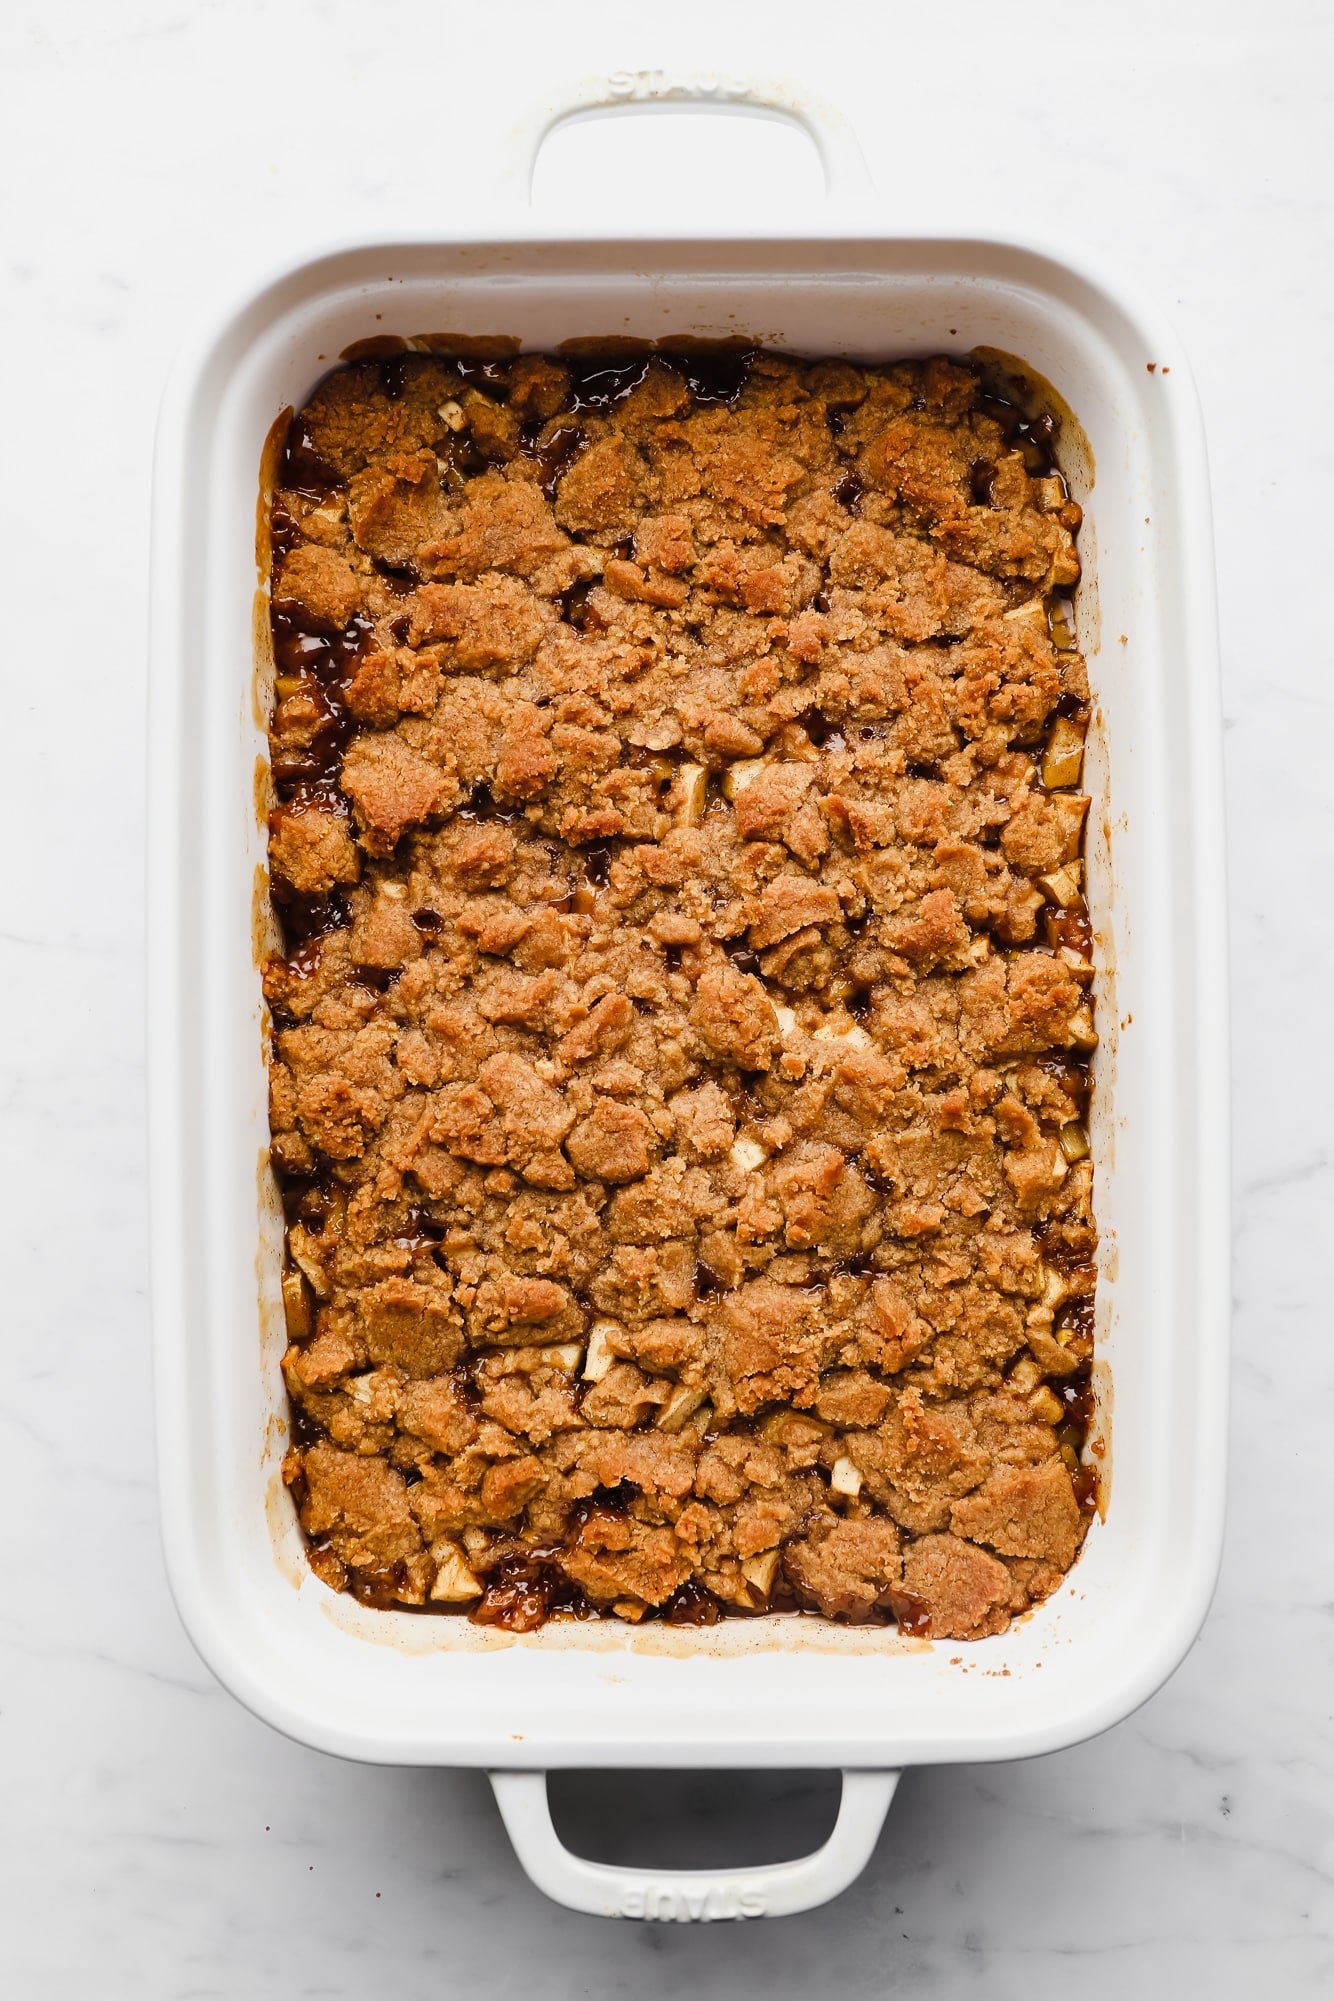 a baked apple crumble in a large white casserole dish.